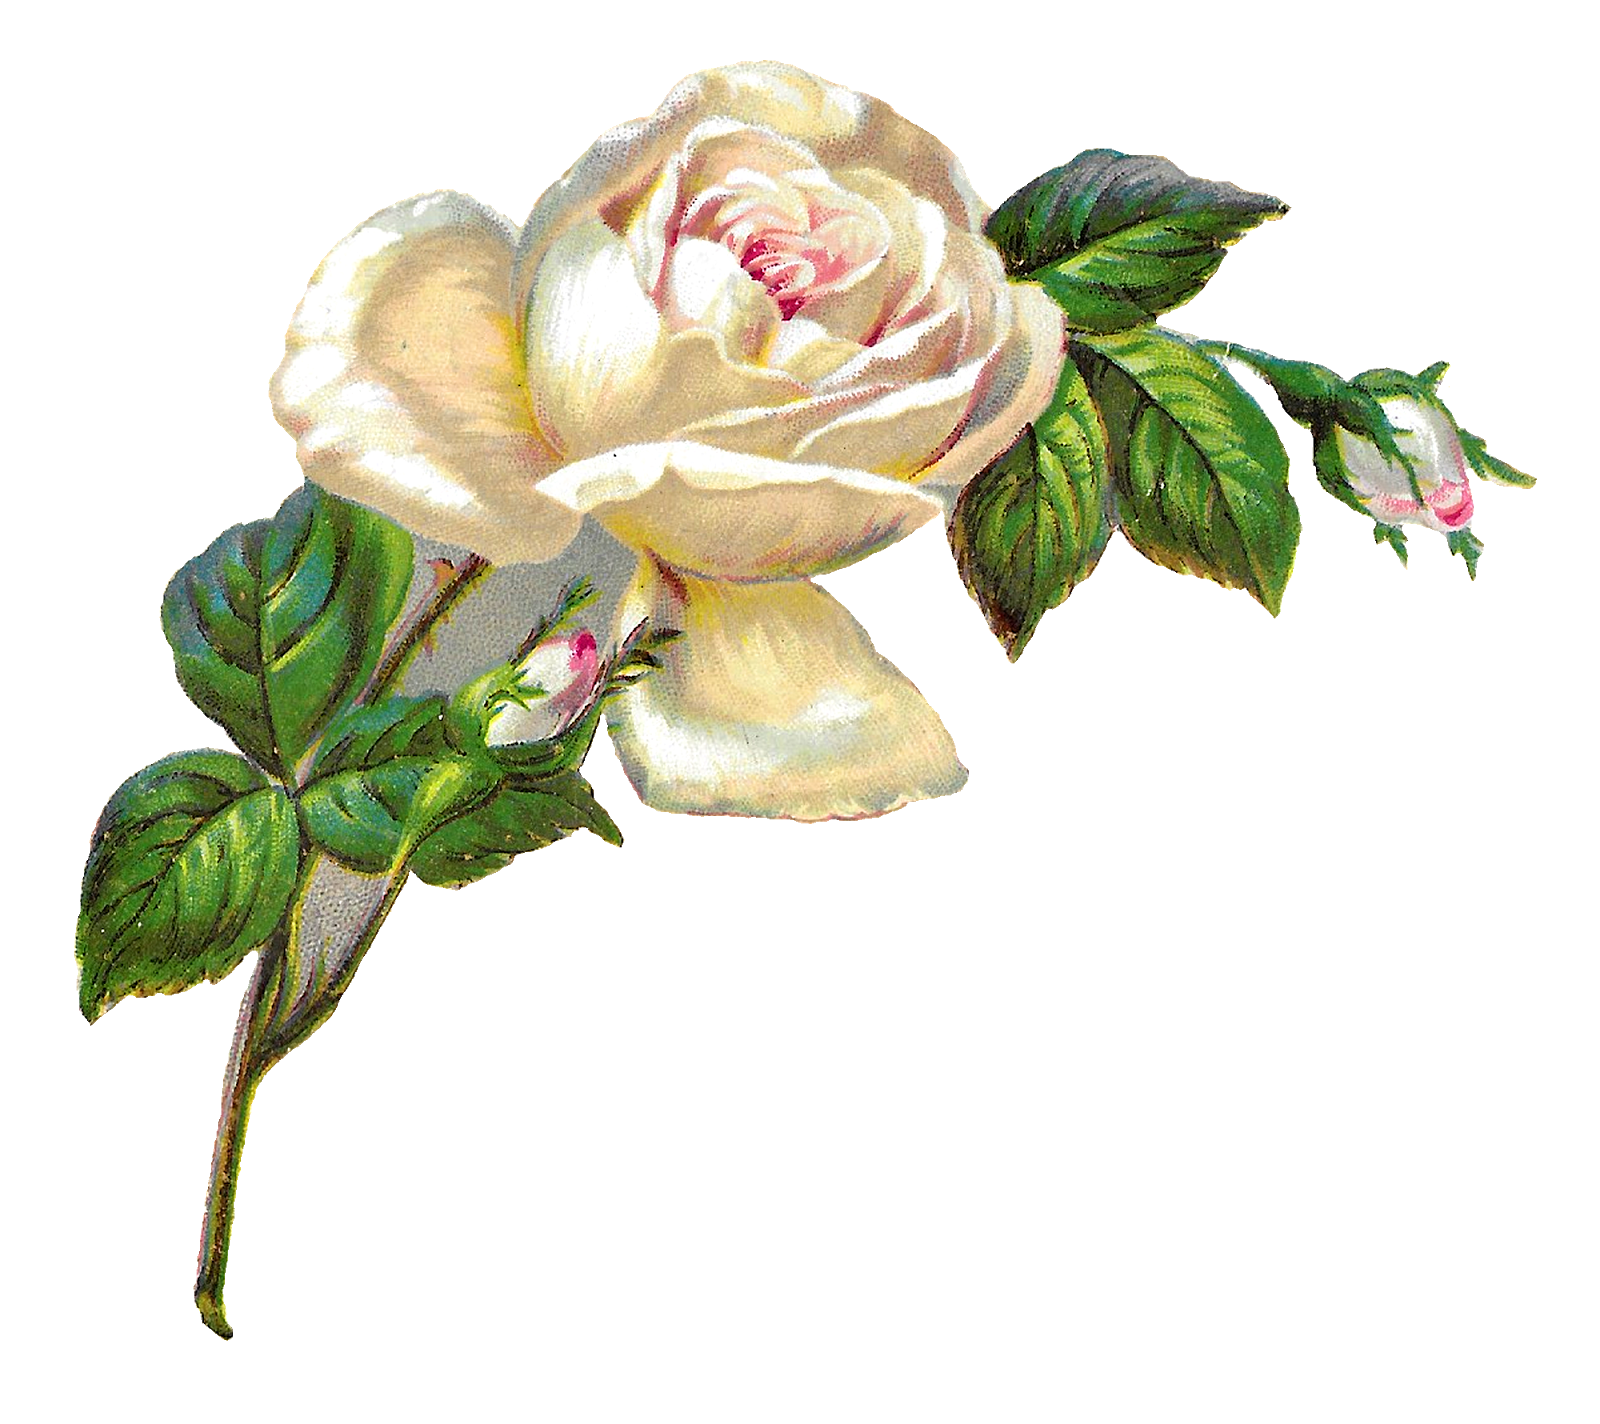 Antique images white rose. Clipart roses shabby chic